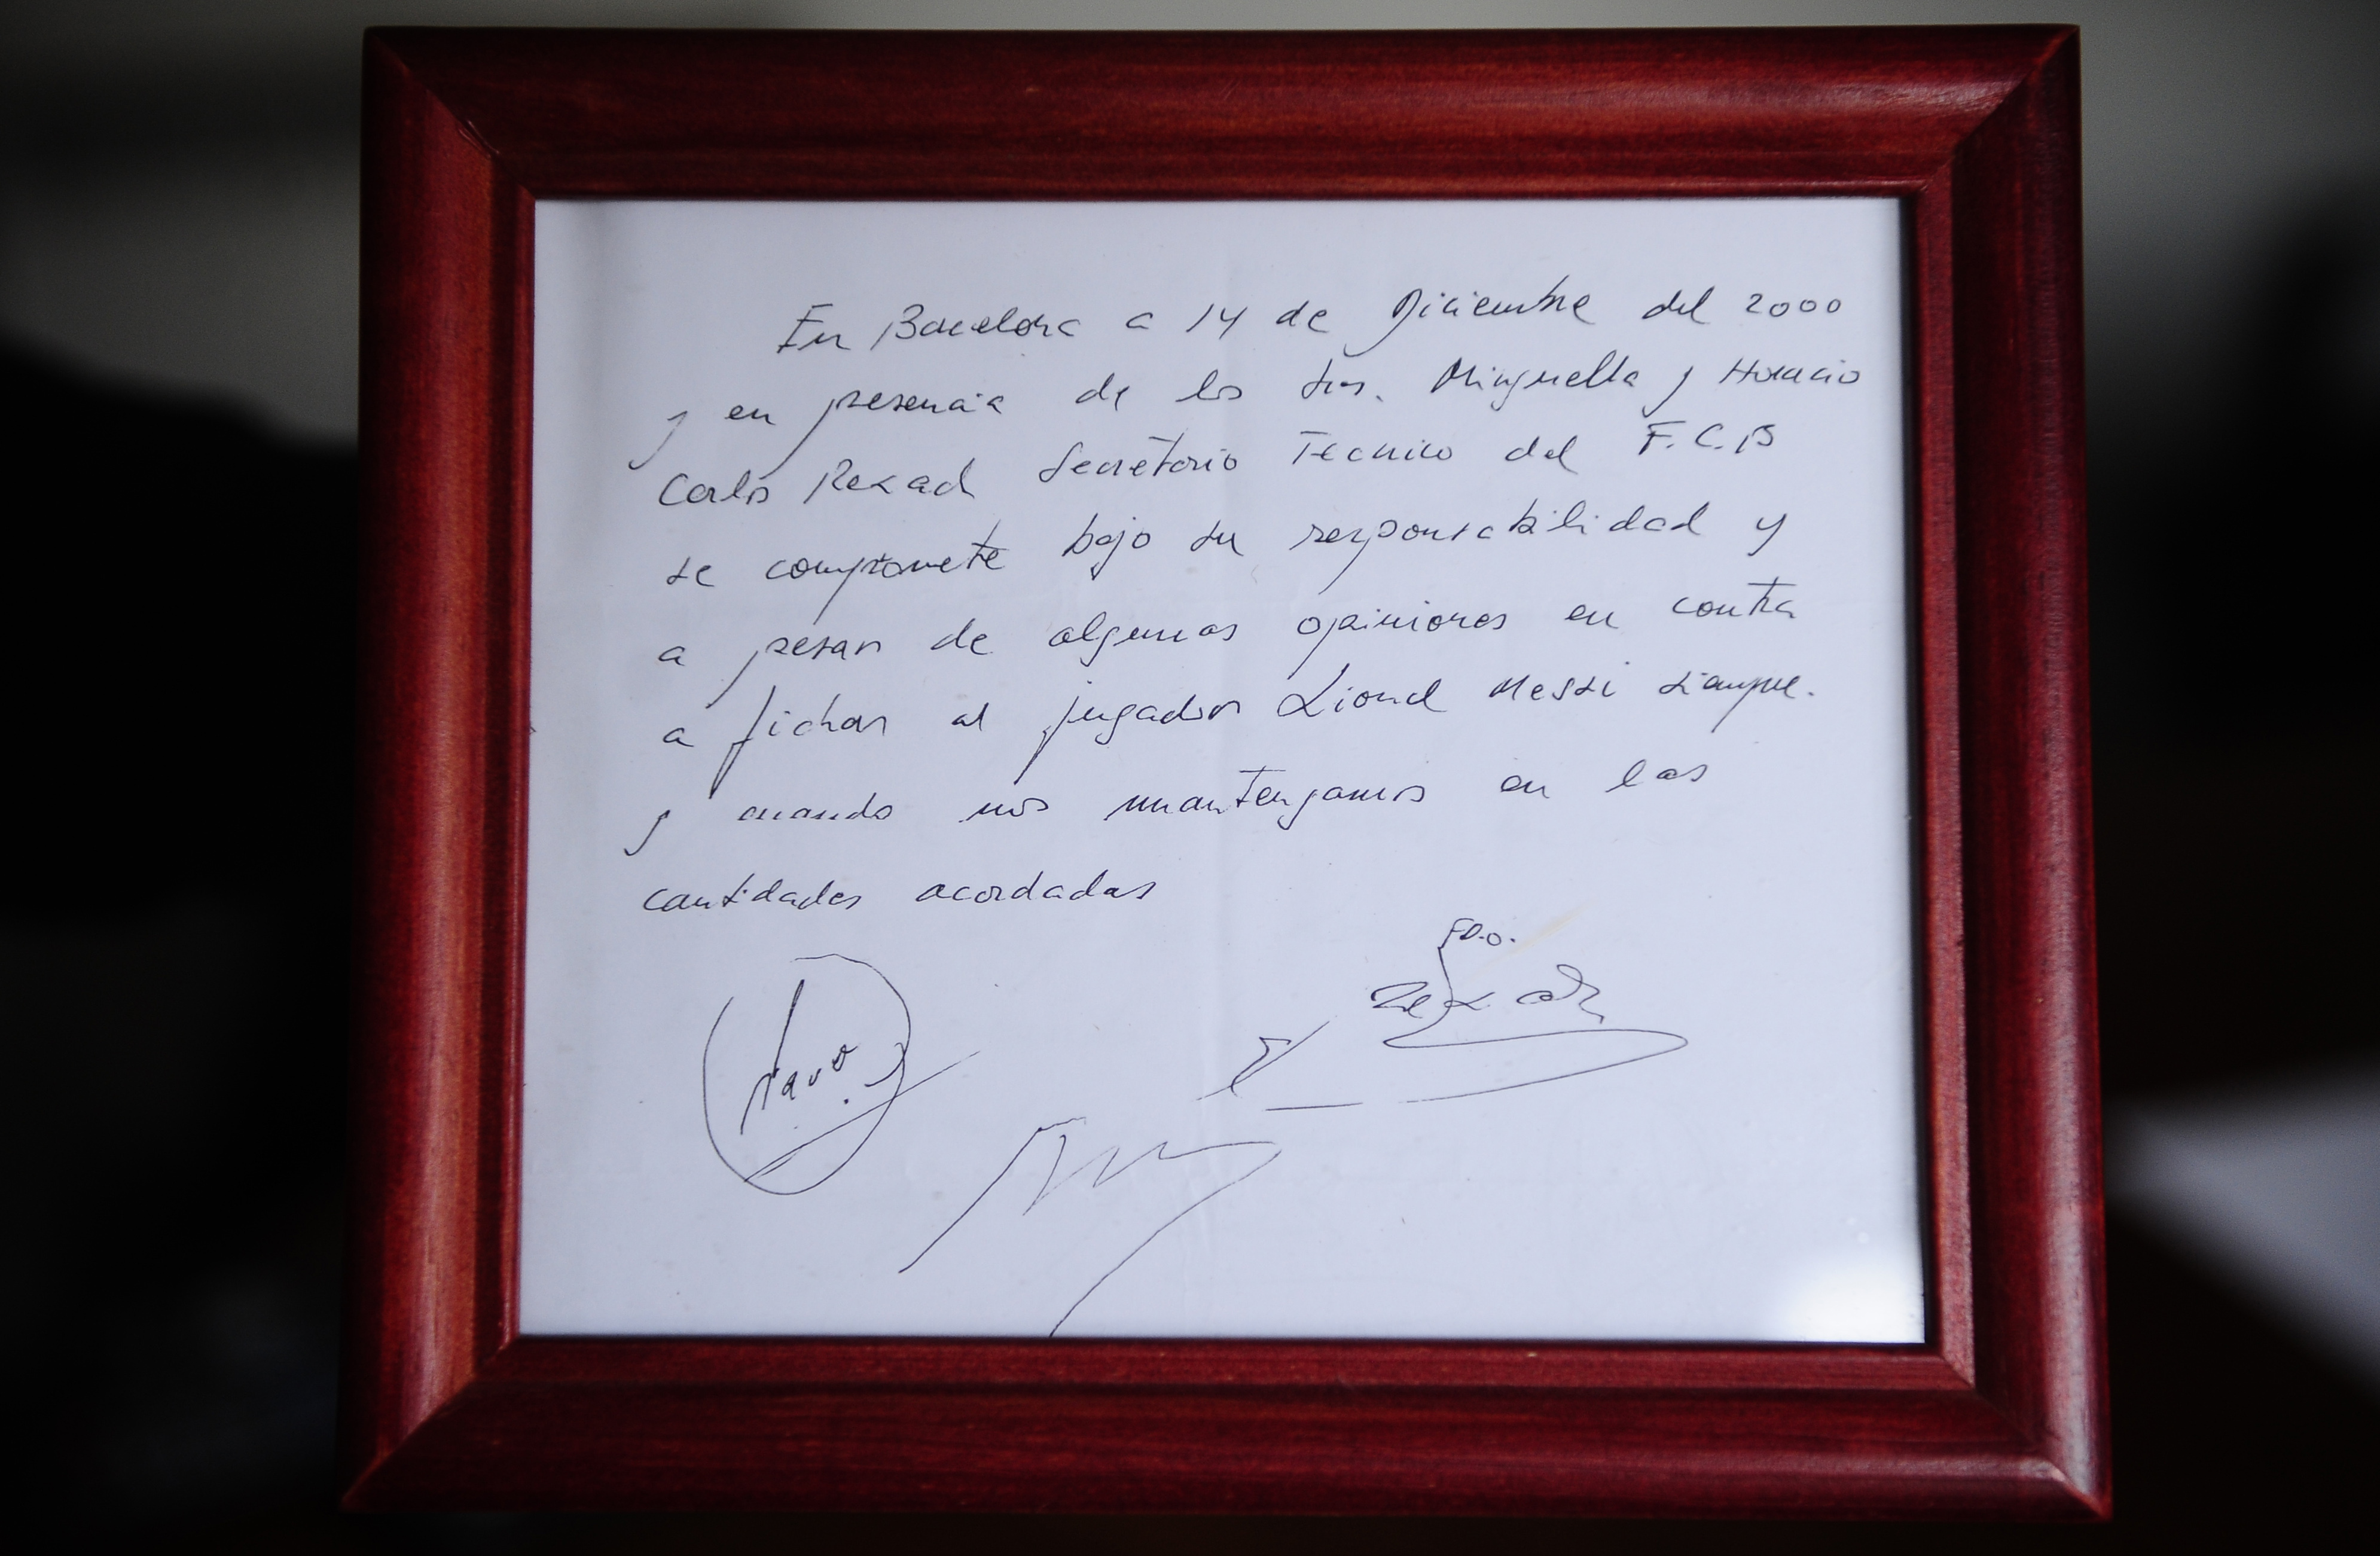 FILE - A framed copy of the napkin linking the 13-year-old Lionel Messi to FC Barcelona is seen in Barcelona, Spain on Jan. 5, 2012. British auction house Bonhams says the famous napkin that linked a young Lionel Messi to Barcelona has sold for $965,000. An agreement in principle to sign then 13-year-old Messi was written on the napkin almost 25 years ago at a Barcelona tennis club. (AP Photo/Manu Fernandez, File)